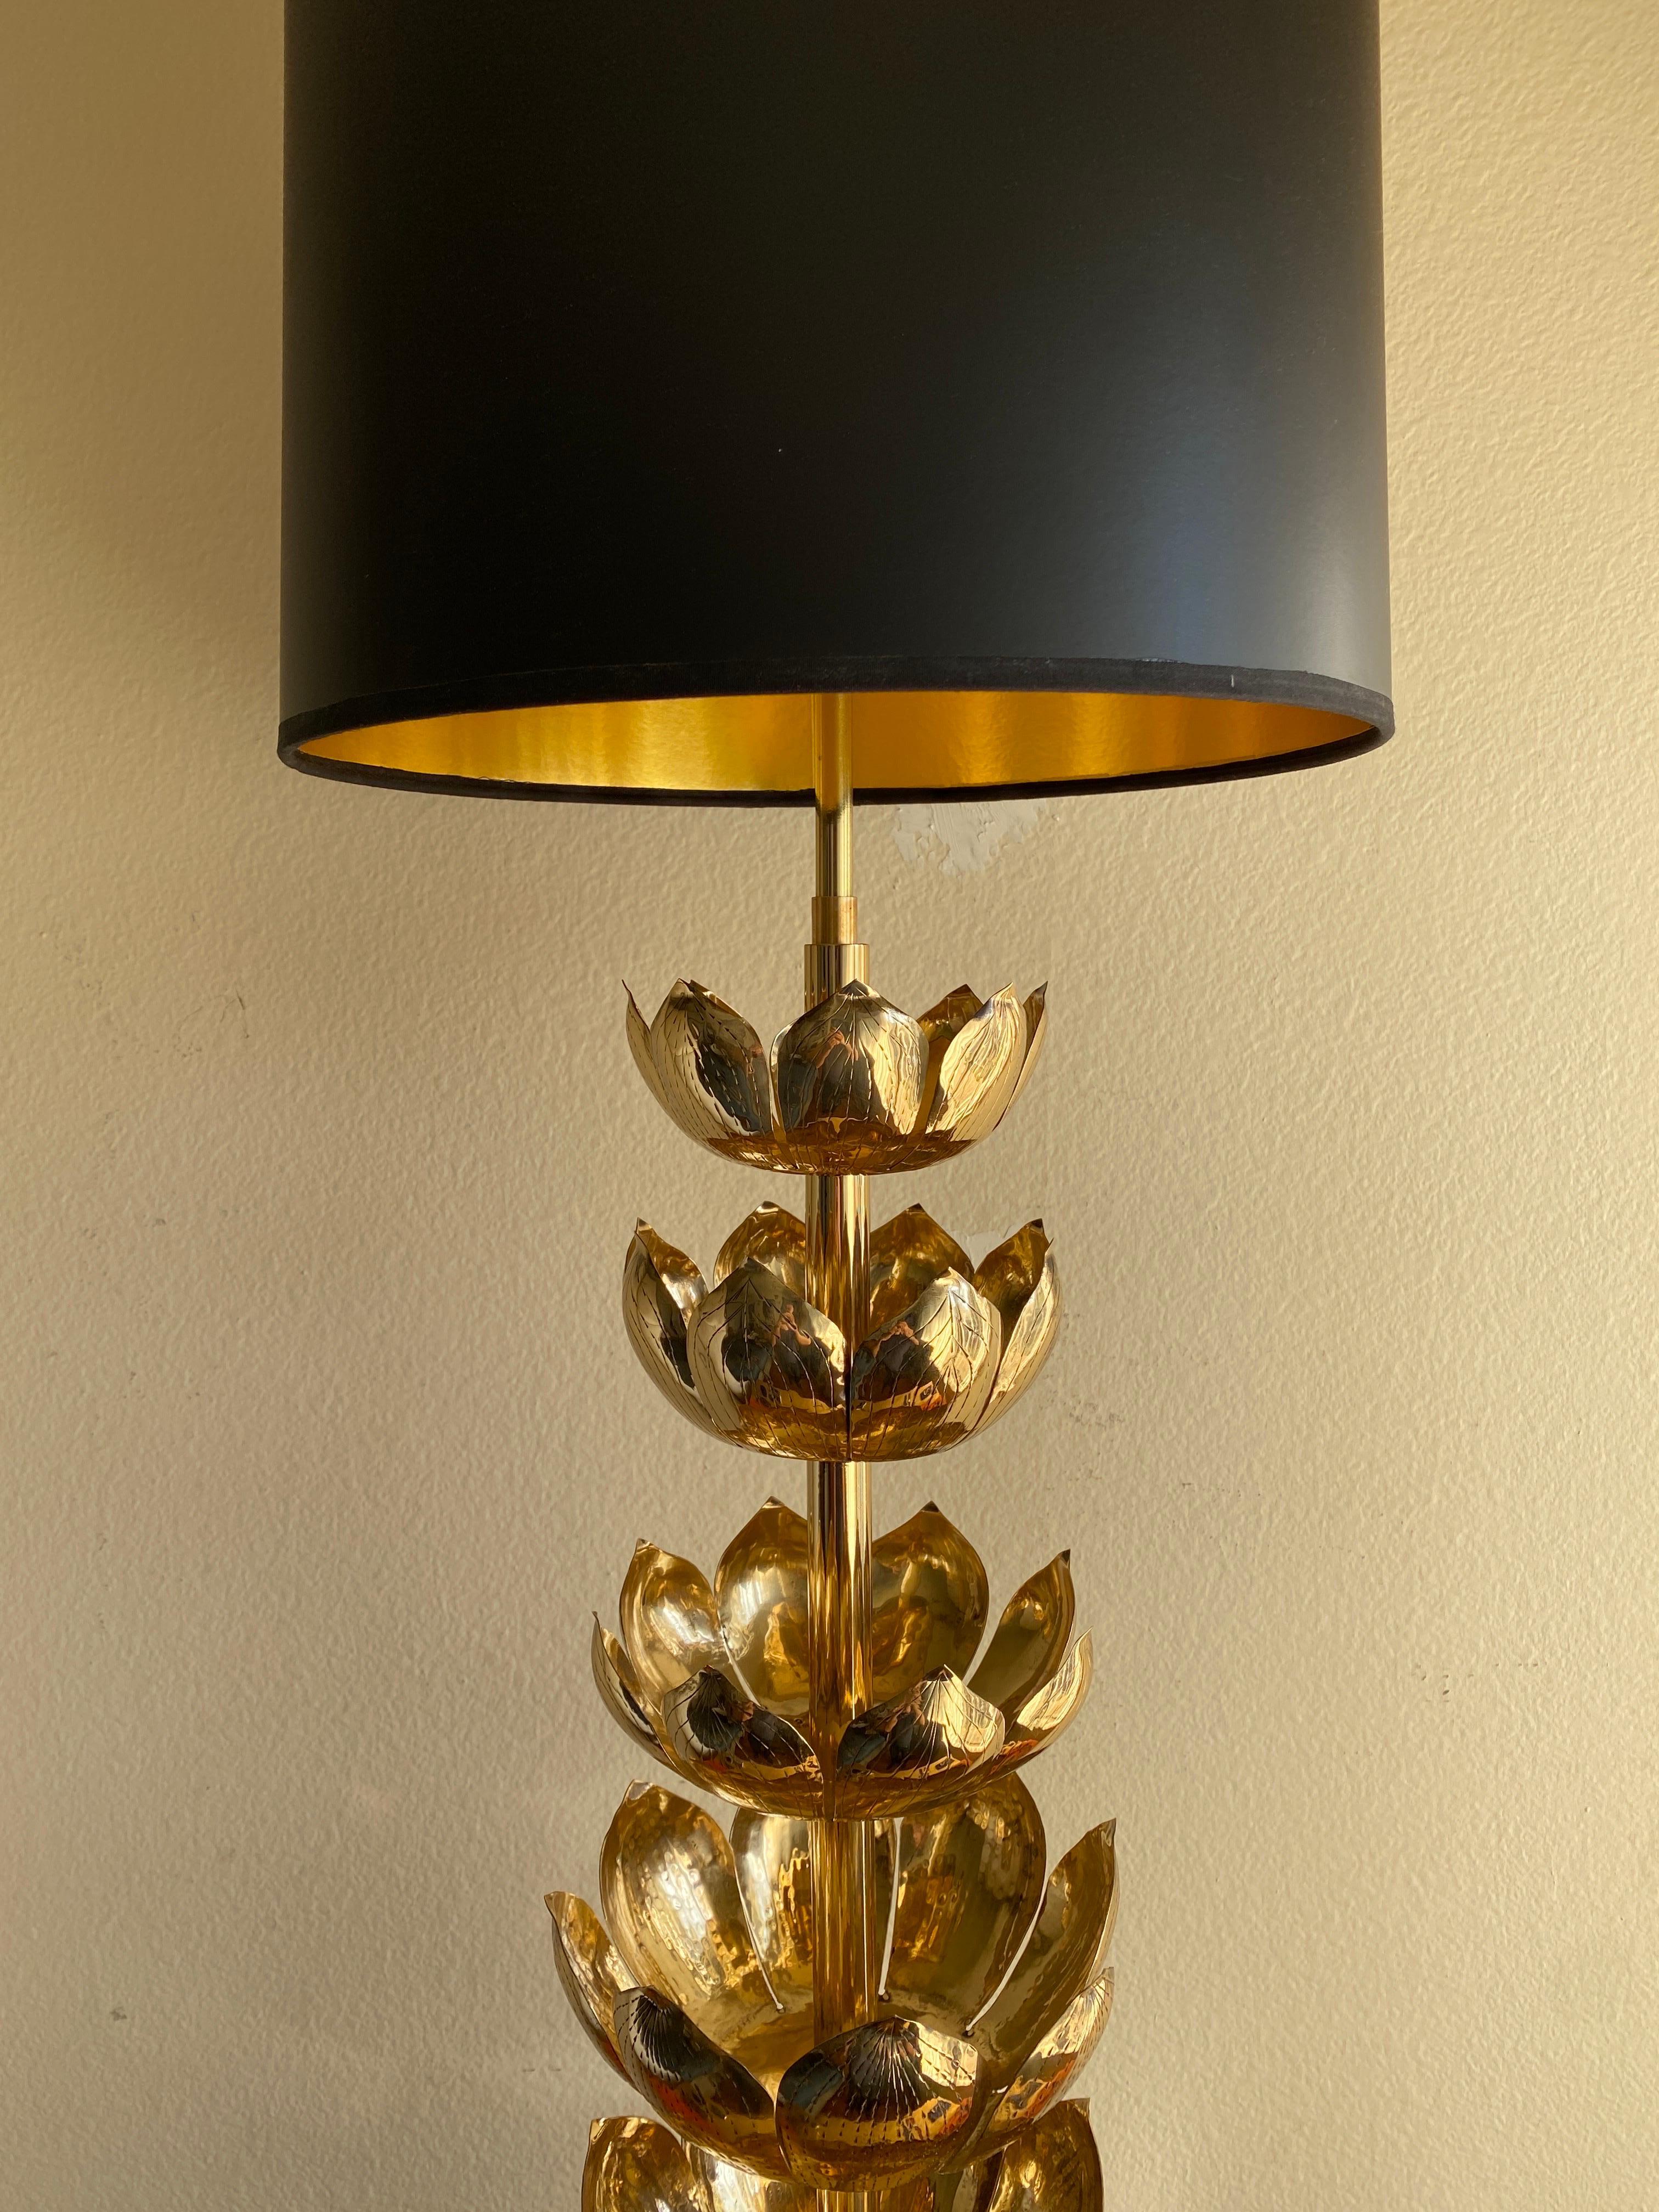 Large polished brass lotus lamp by Feldman Lighting Co. Shade is not included.